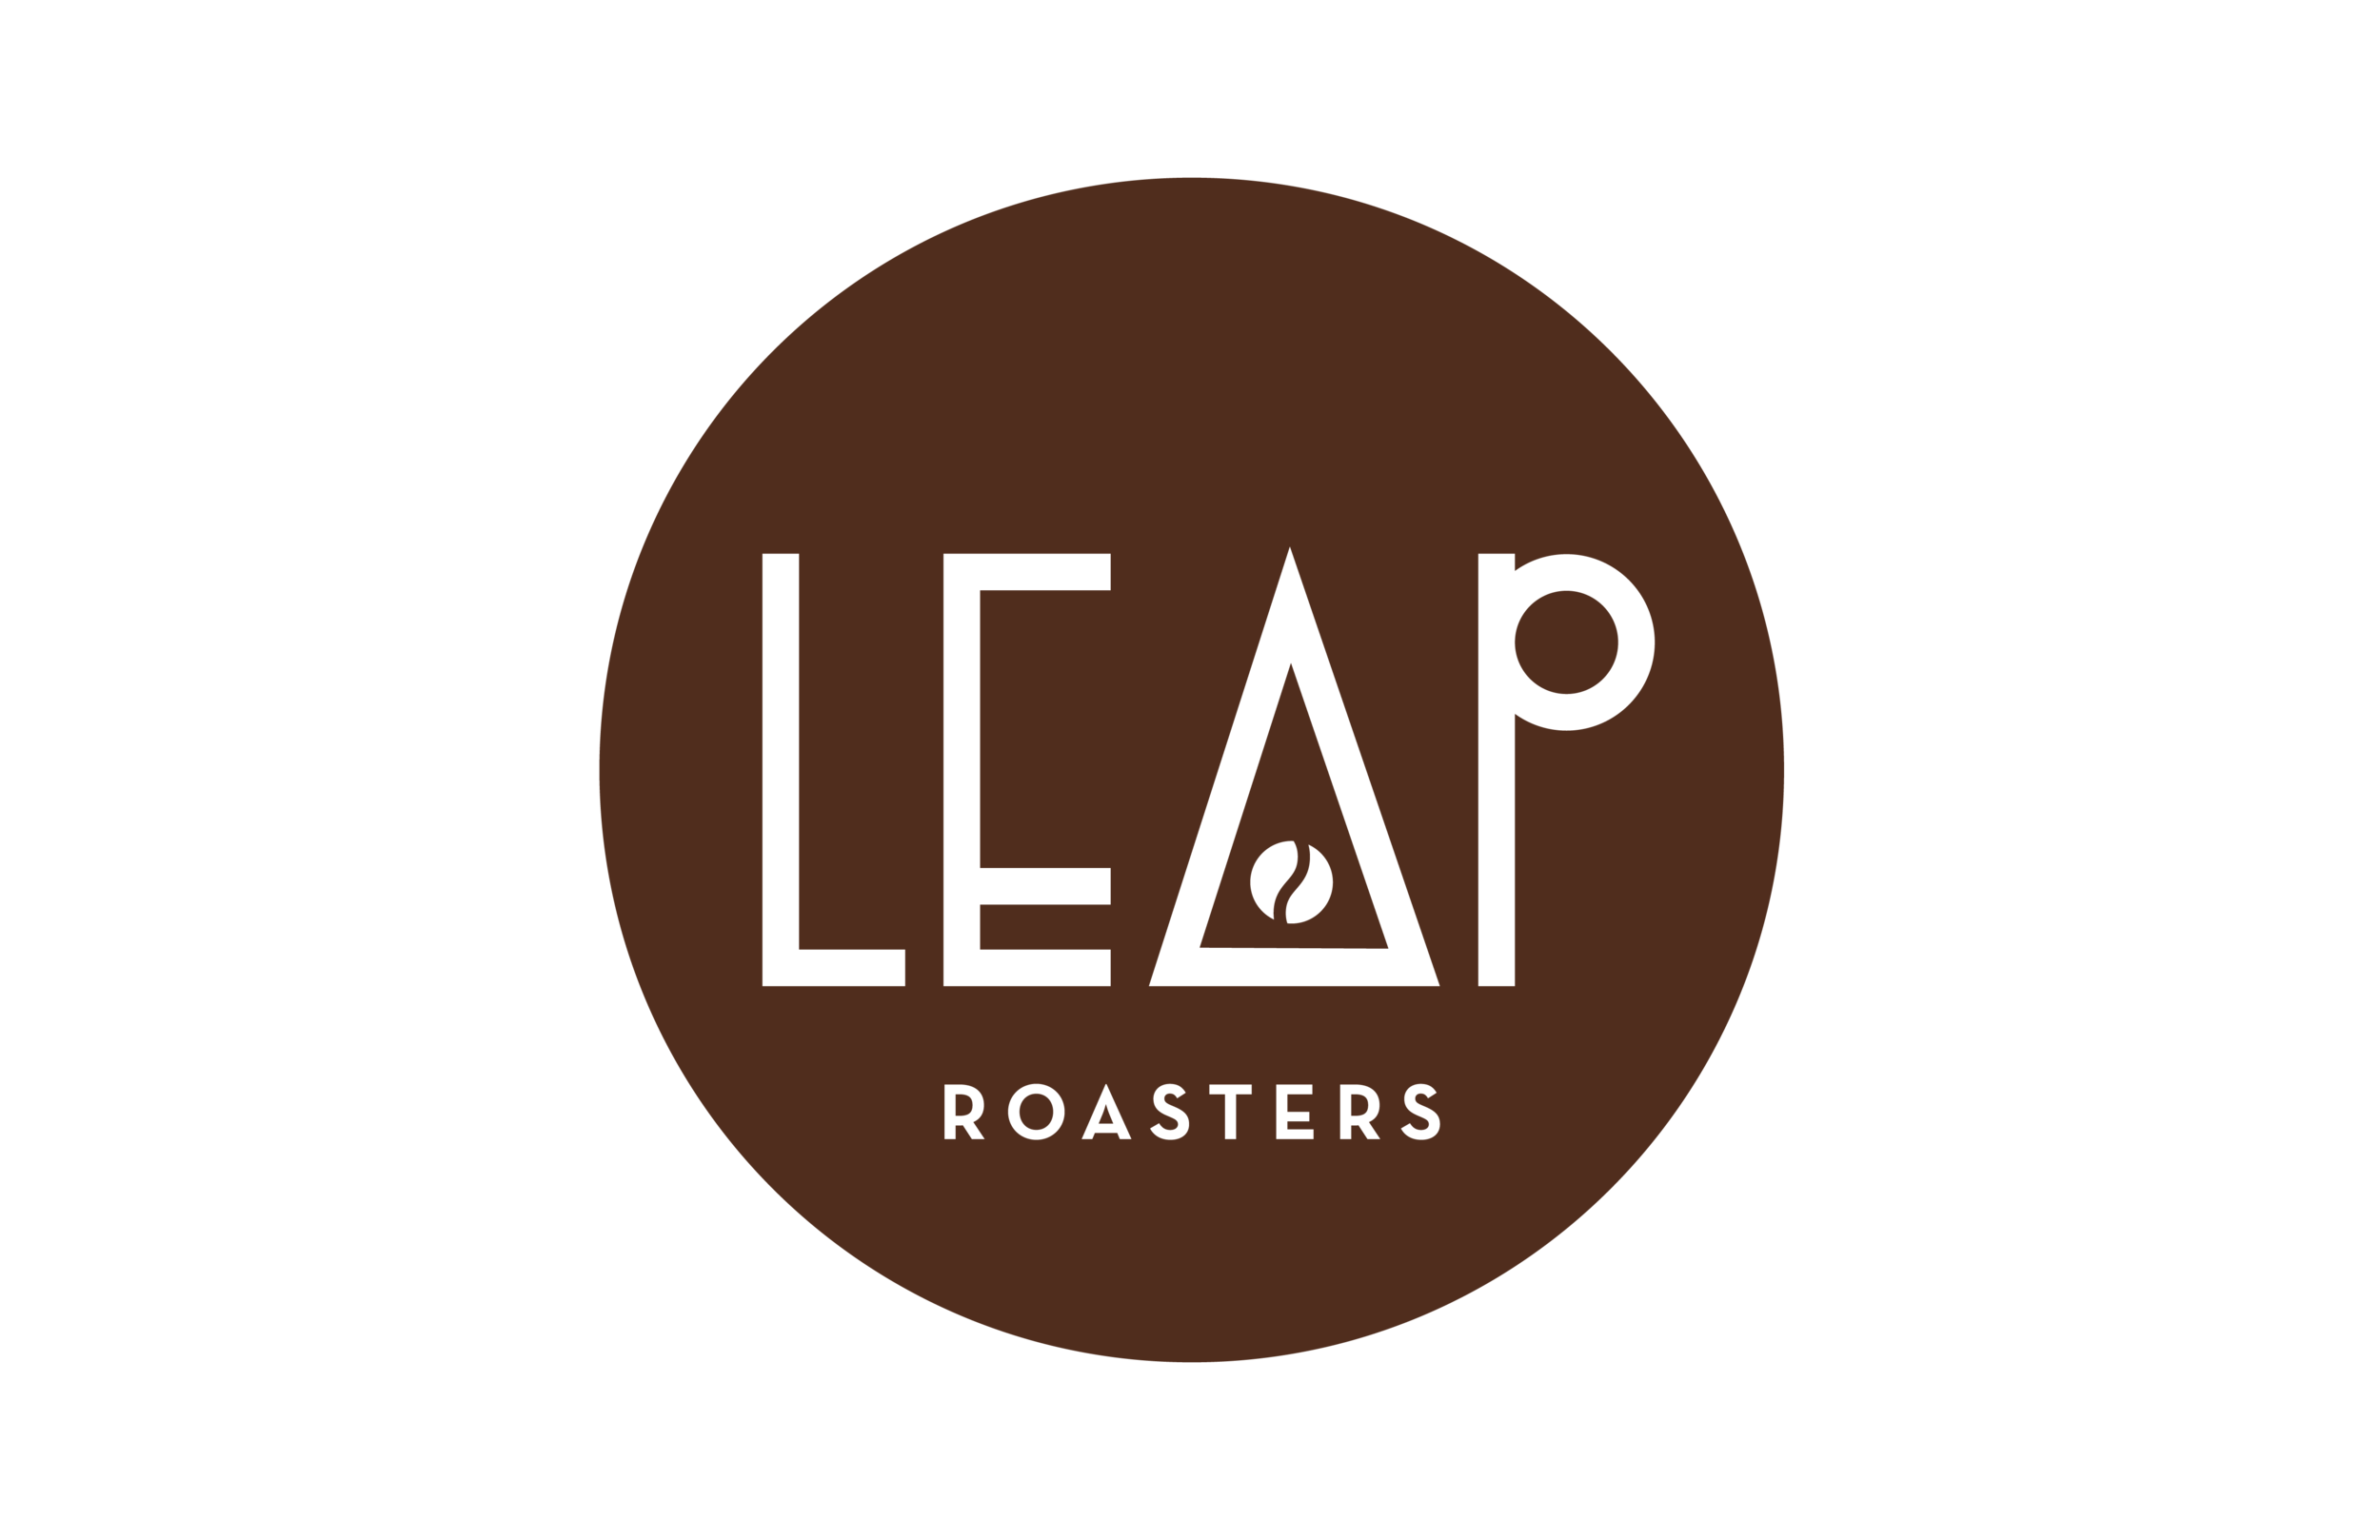 Where To Buy Leap Coffee Roasters